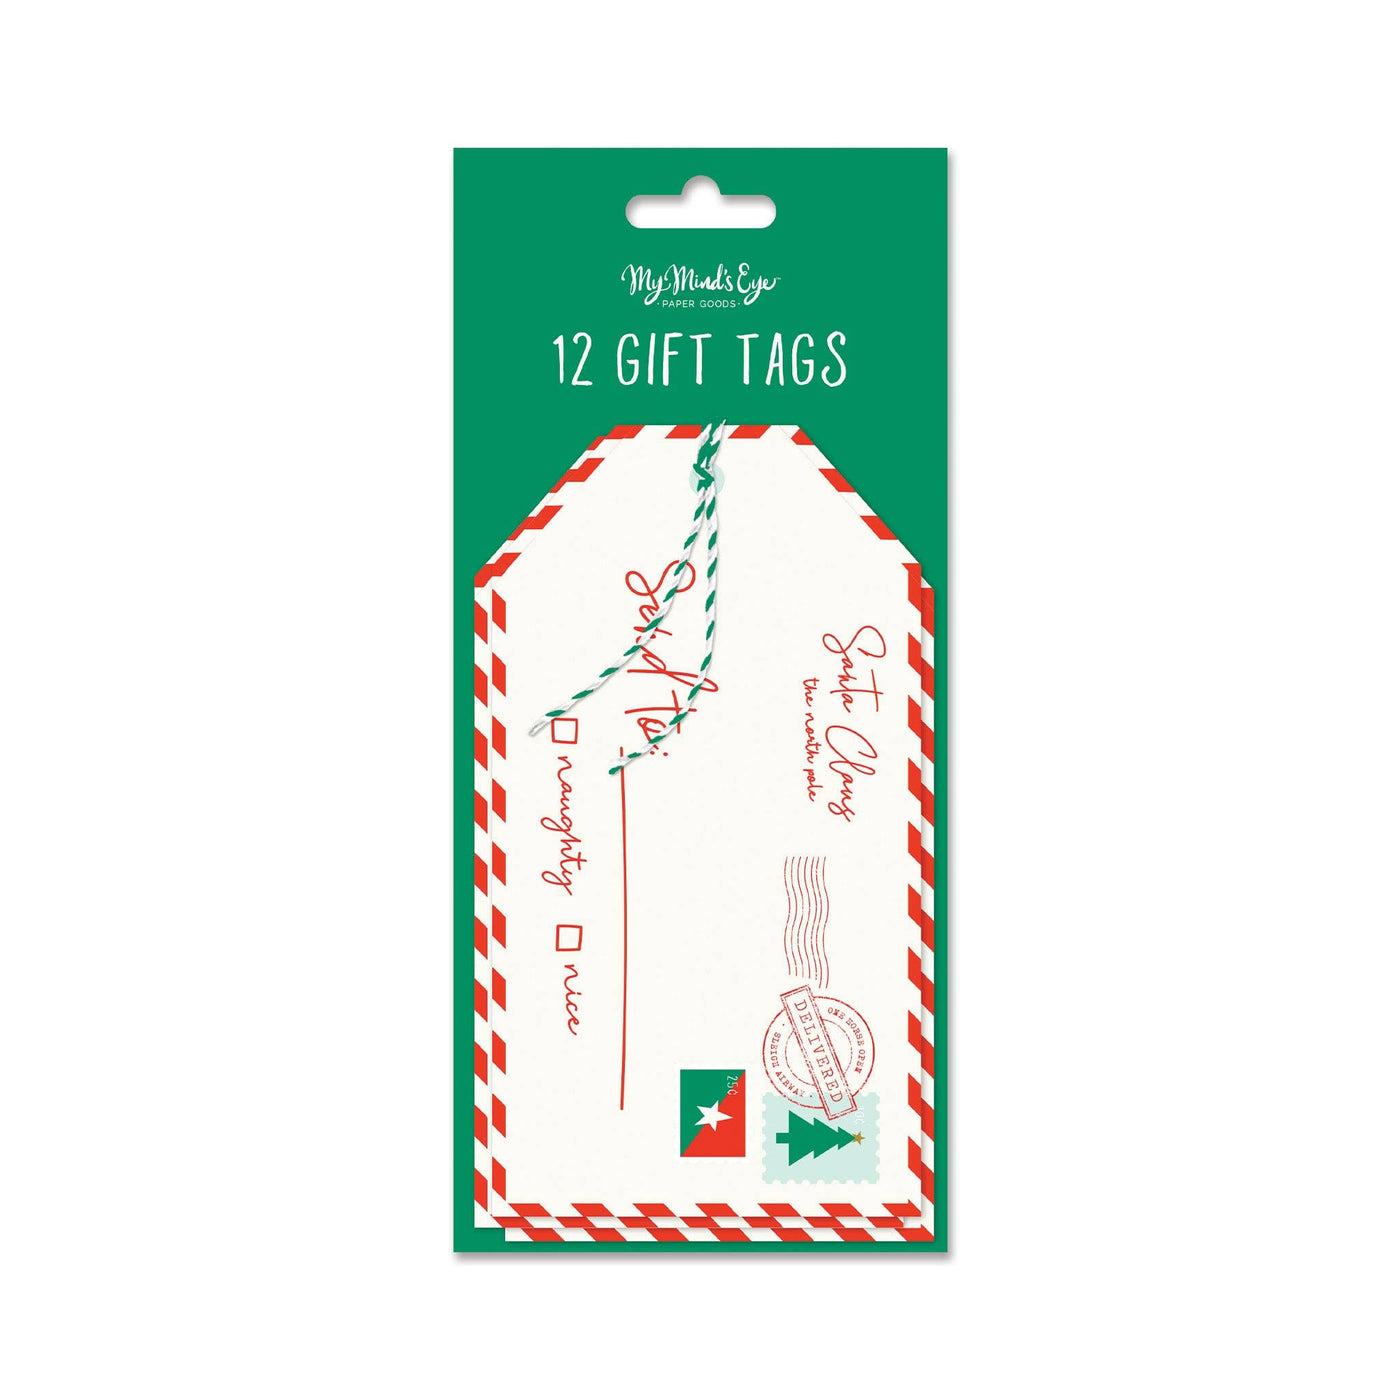 LETTERS TO SANTA GIFT TAGS